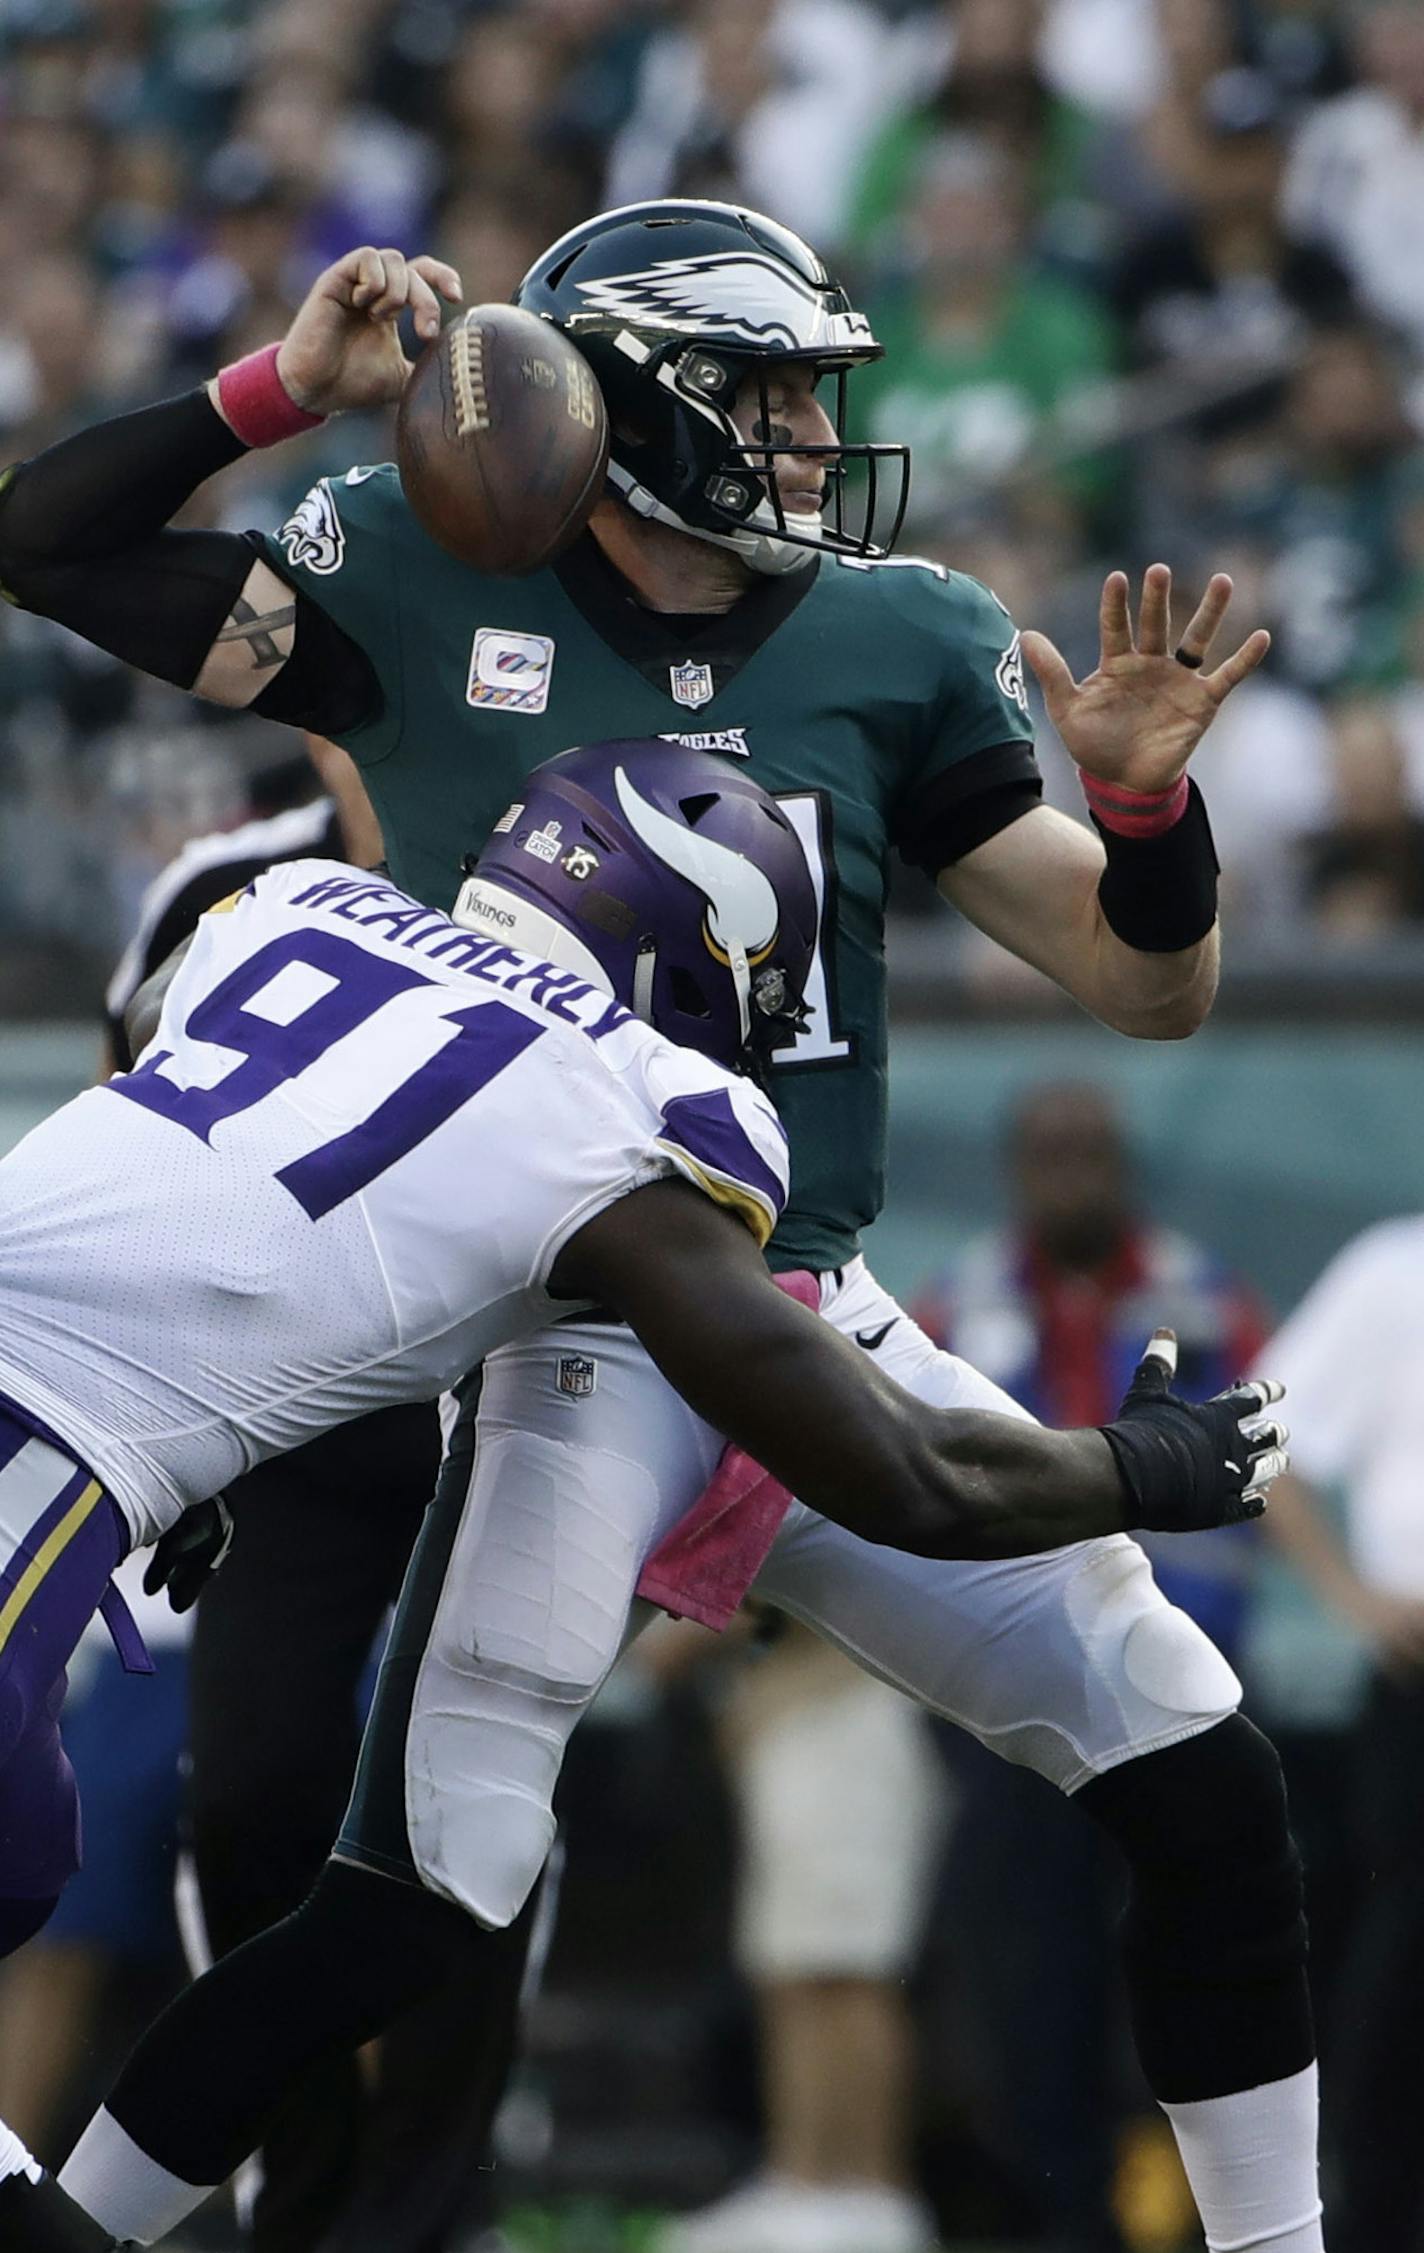 Philadelphia Eagles' Carson Wentz, right, fumbles after a hit from Minnesota Vikings' Stephen Weatherly (91) during the first half of an NFL football game, Sunday, Oct. 7, 2018, in Philadelphia. (AP Photo/Matt Rourke)